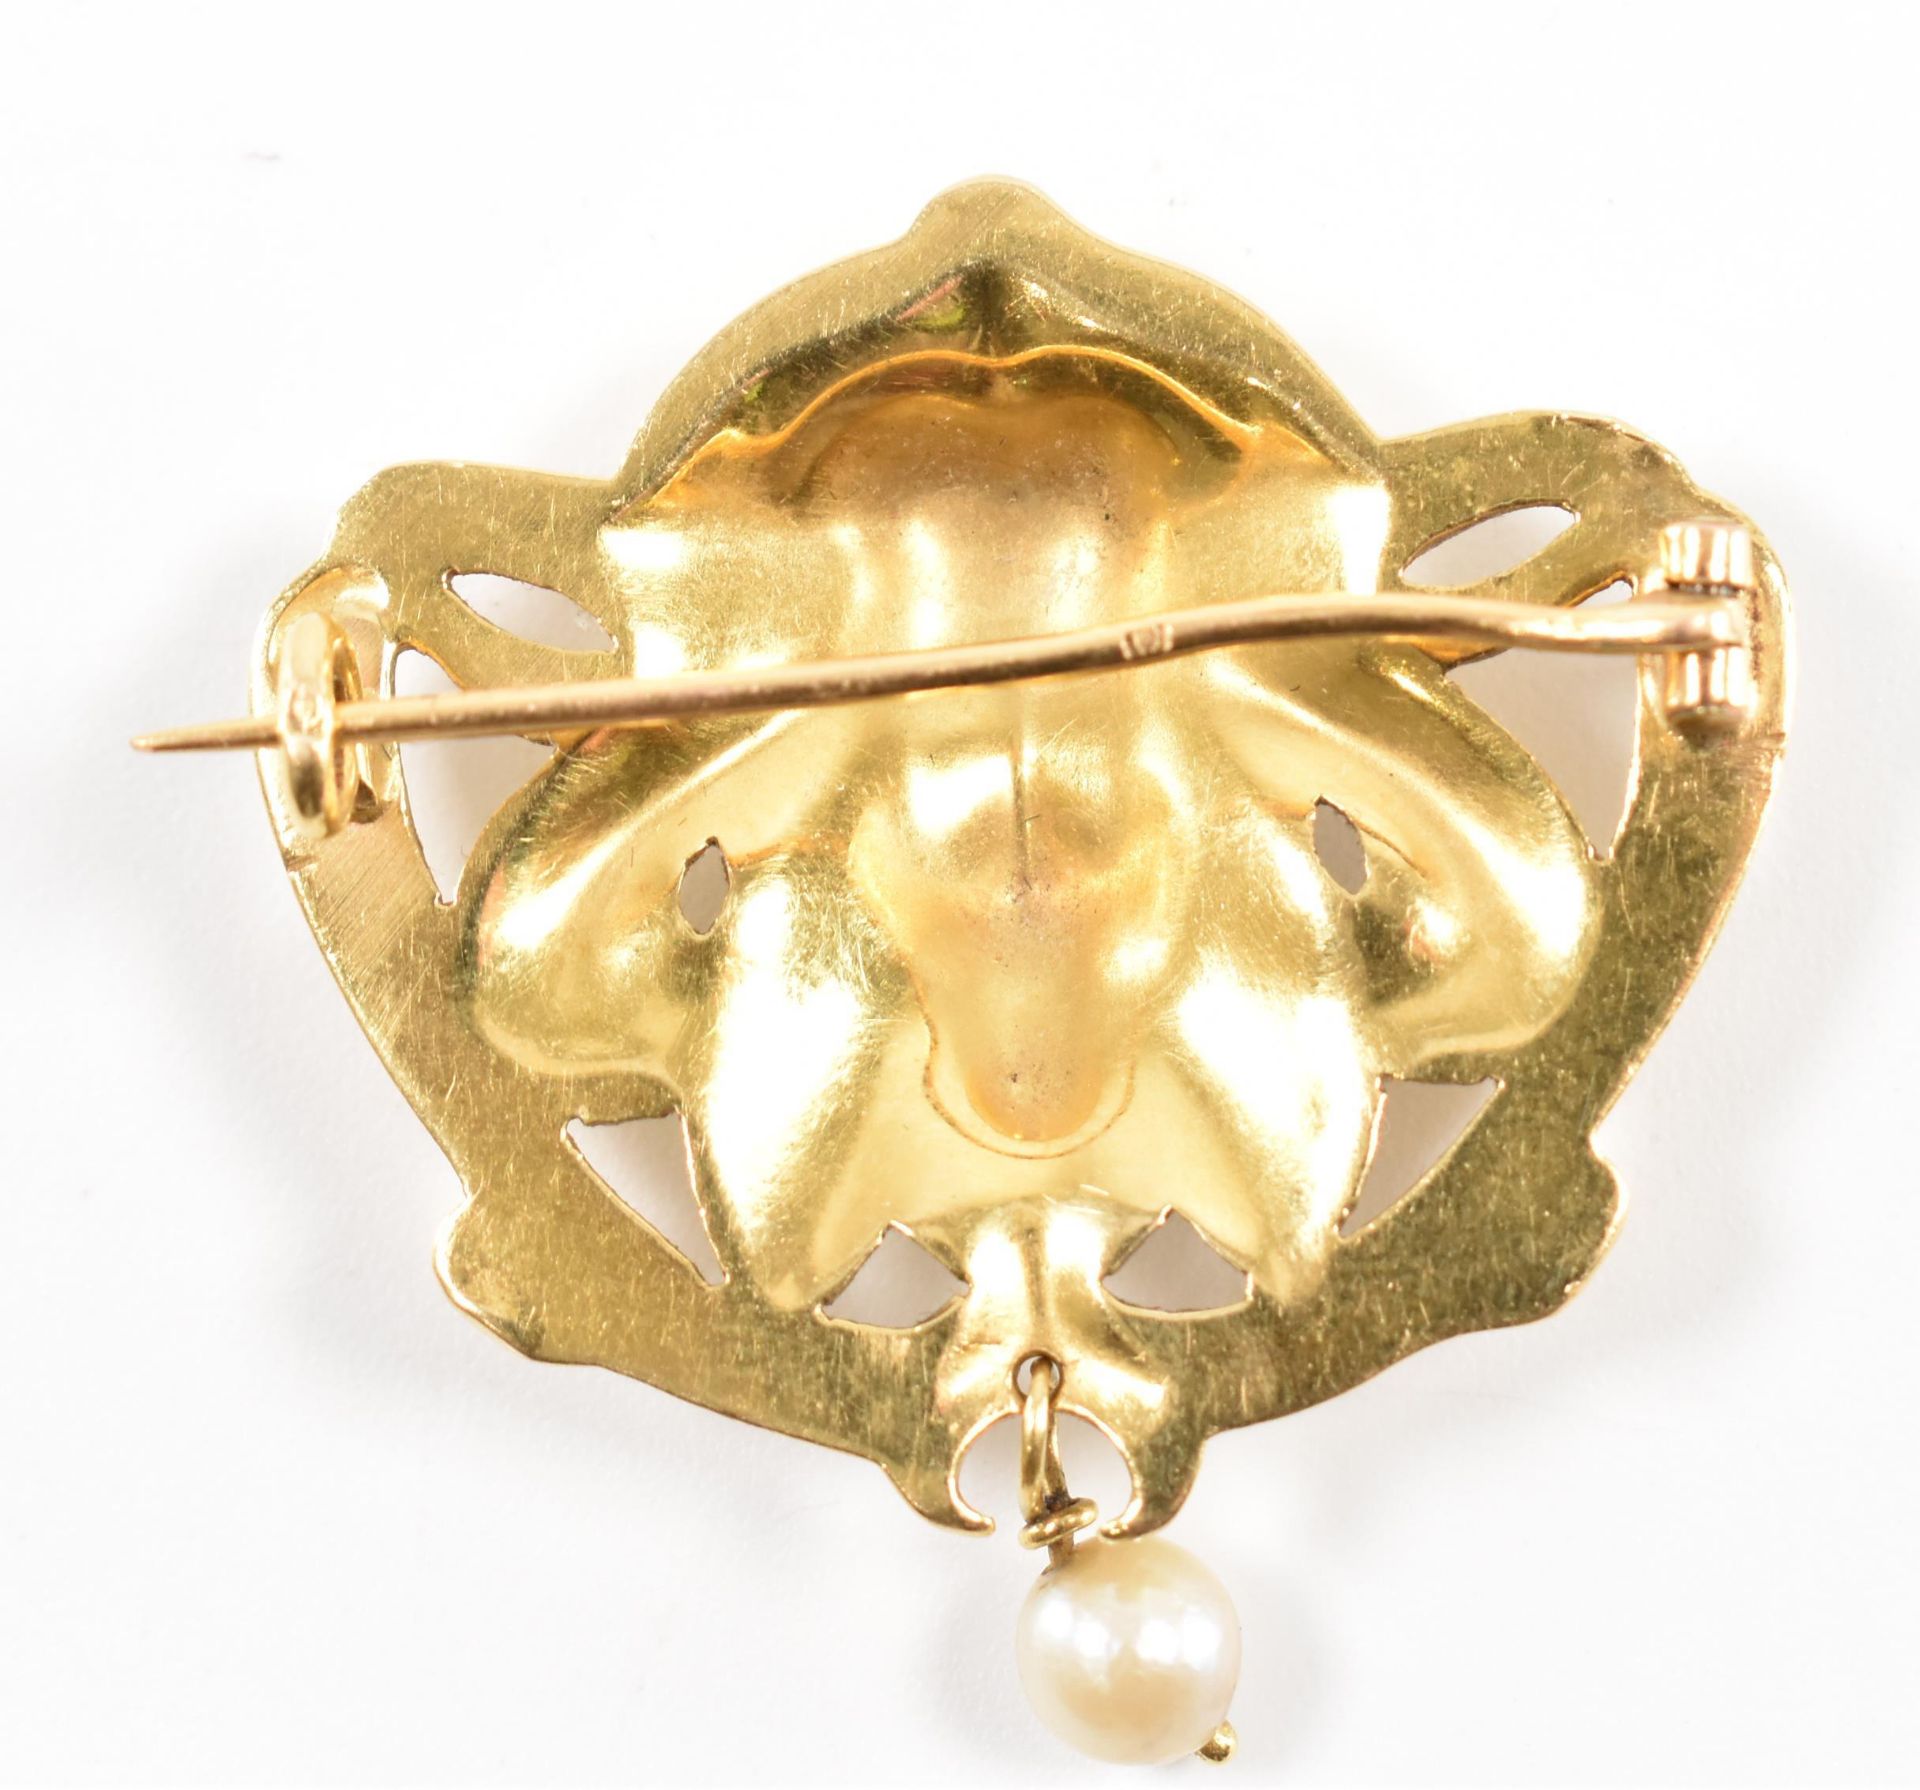 FRENCH 18CT GOLD ART NOUVEAU BROOCH PIN - Image 3 of 6